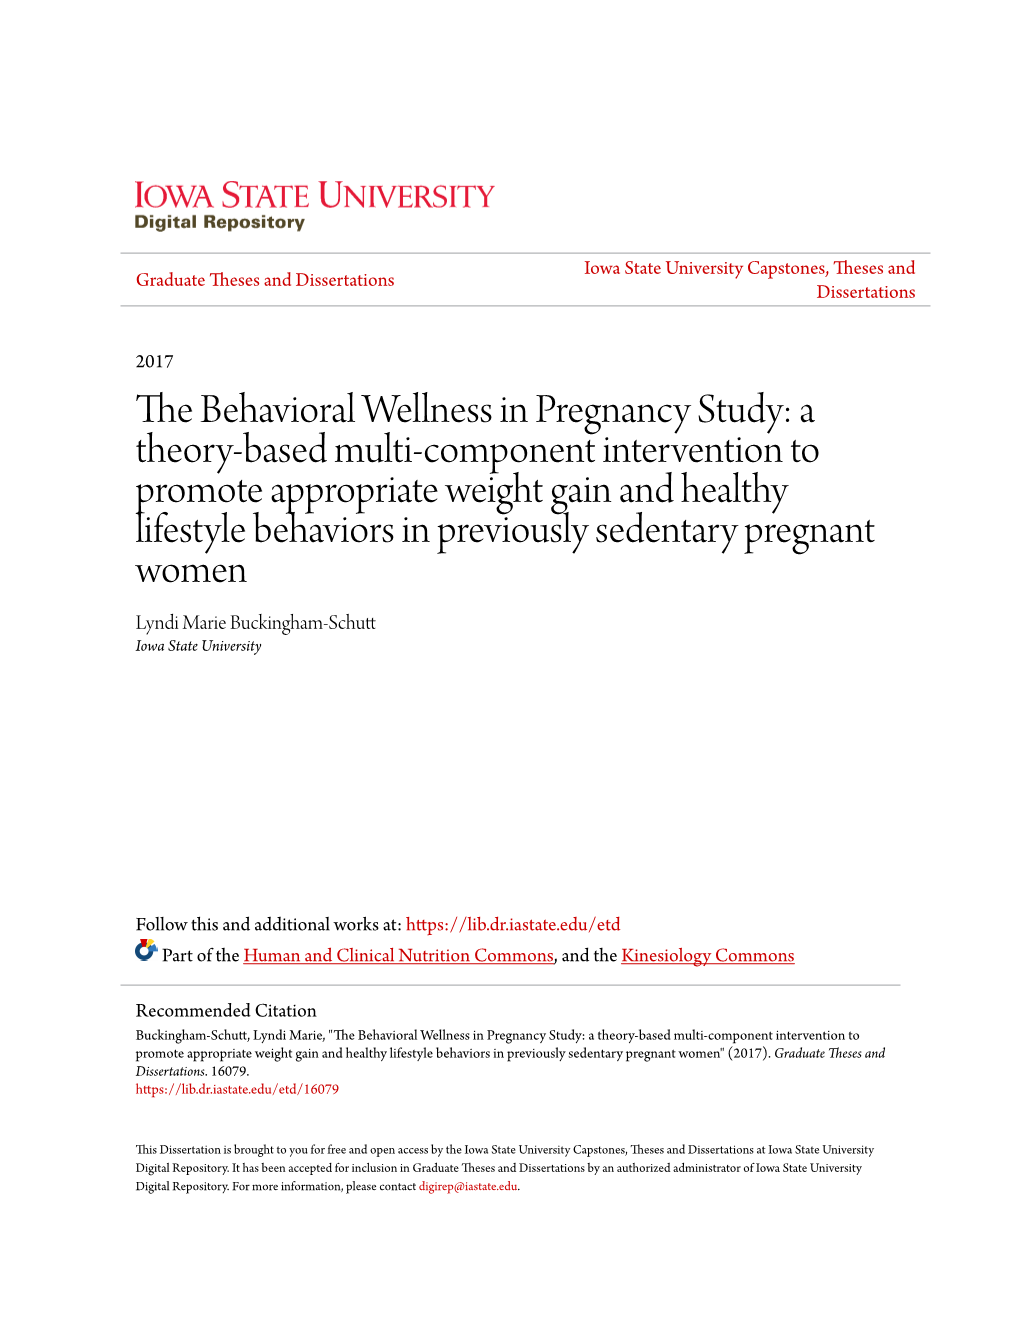 The Behavioral Wellness in Pregnancy Study: a Theory-Based